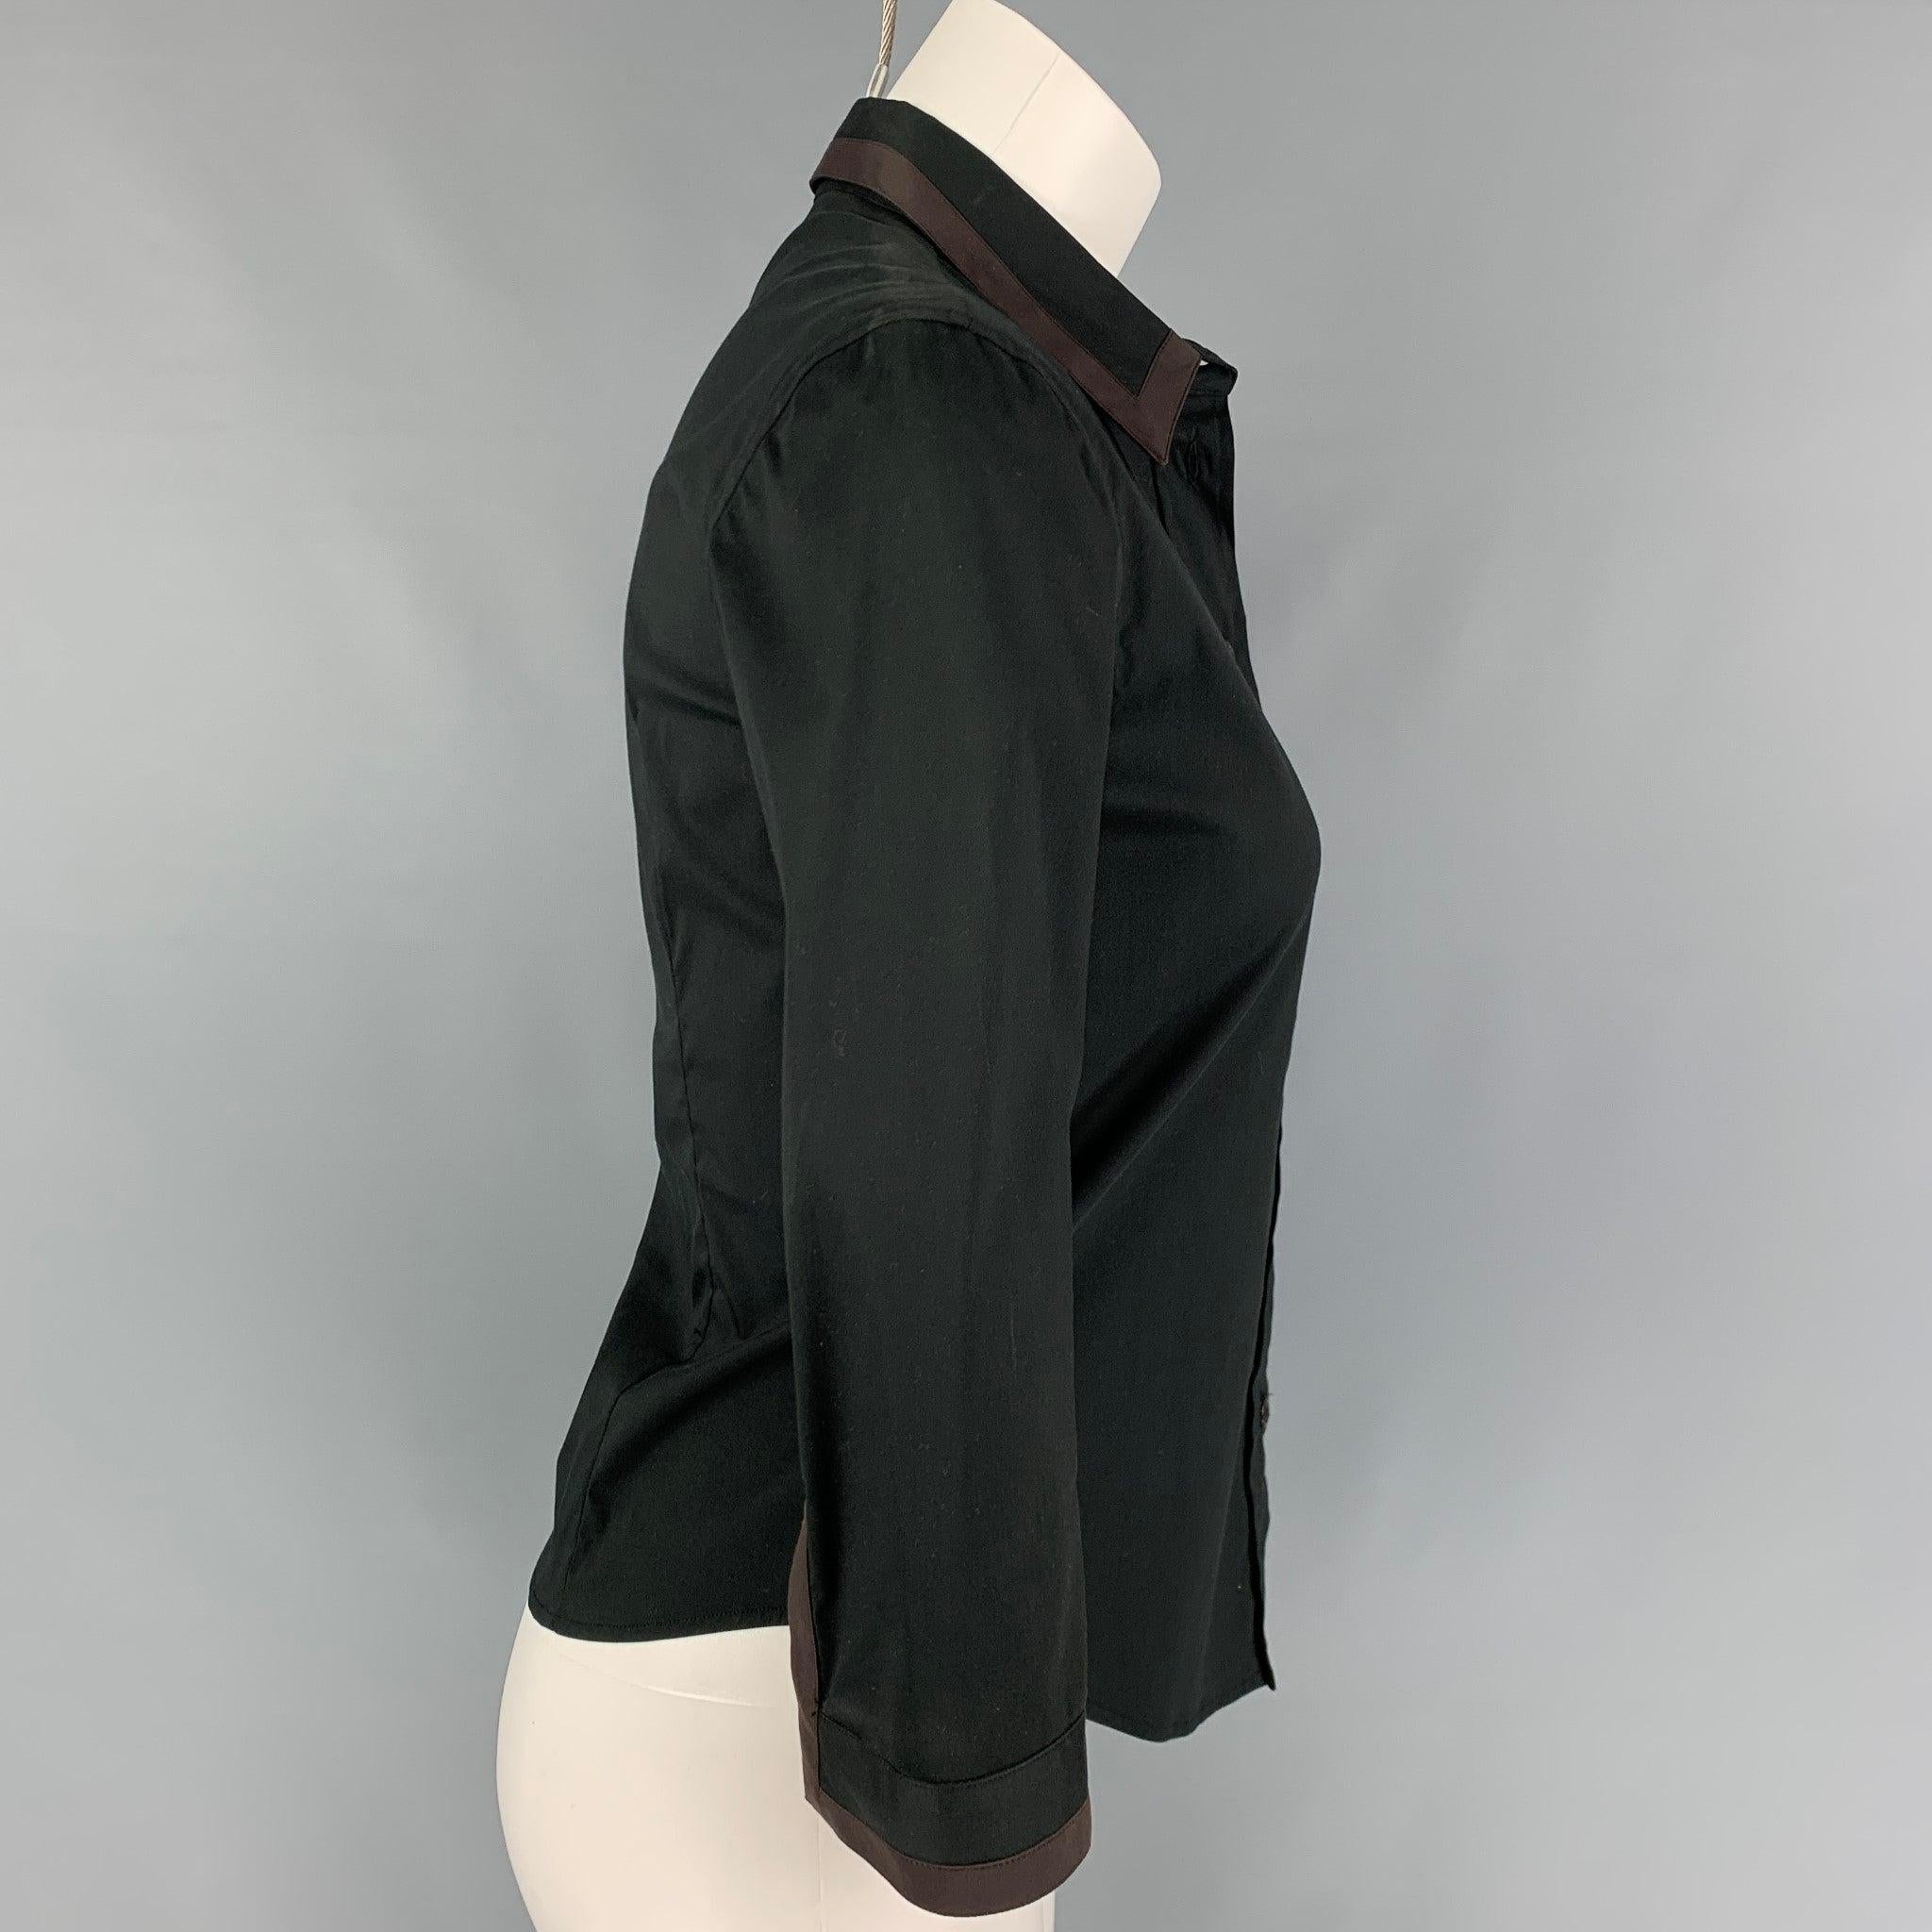 PRADA blouse comes in a black cotton / nylon featuring a brown trim, spread collar, and a buttoned closure. Made in Italy.
Very Good
Pre-Owned Condition. 

Marked:   38 

Measurements: 
 
Shoulder: 15.5 inches  Bust: 33 inches Sleeve: 17.75 inches 